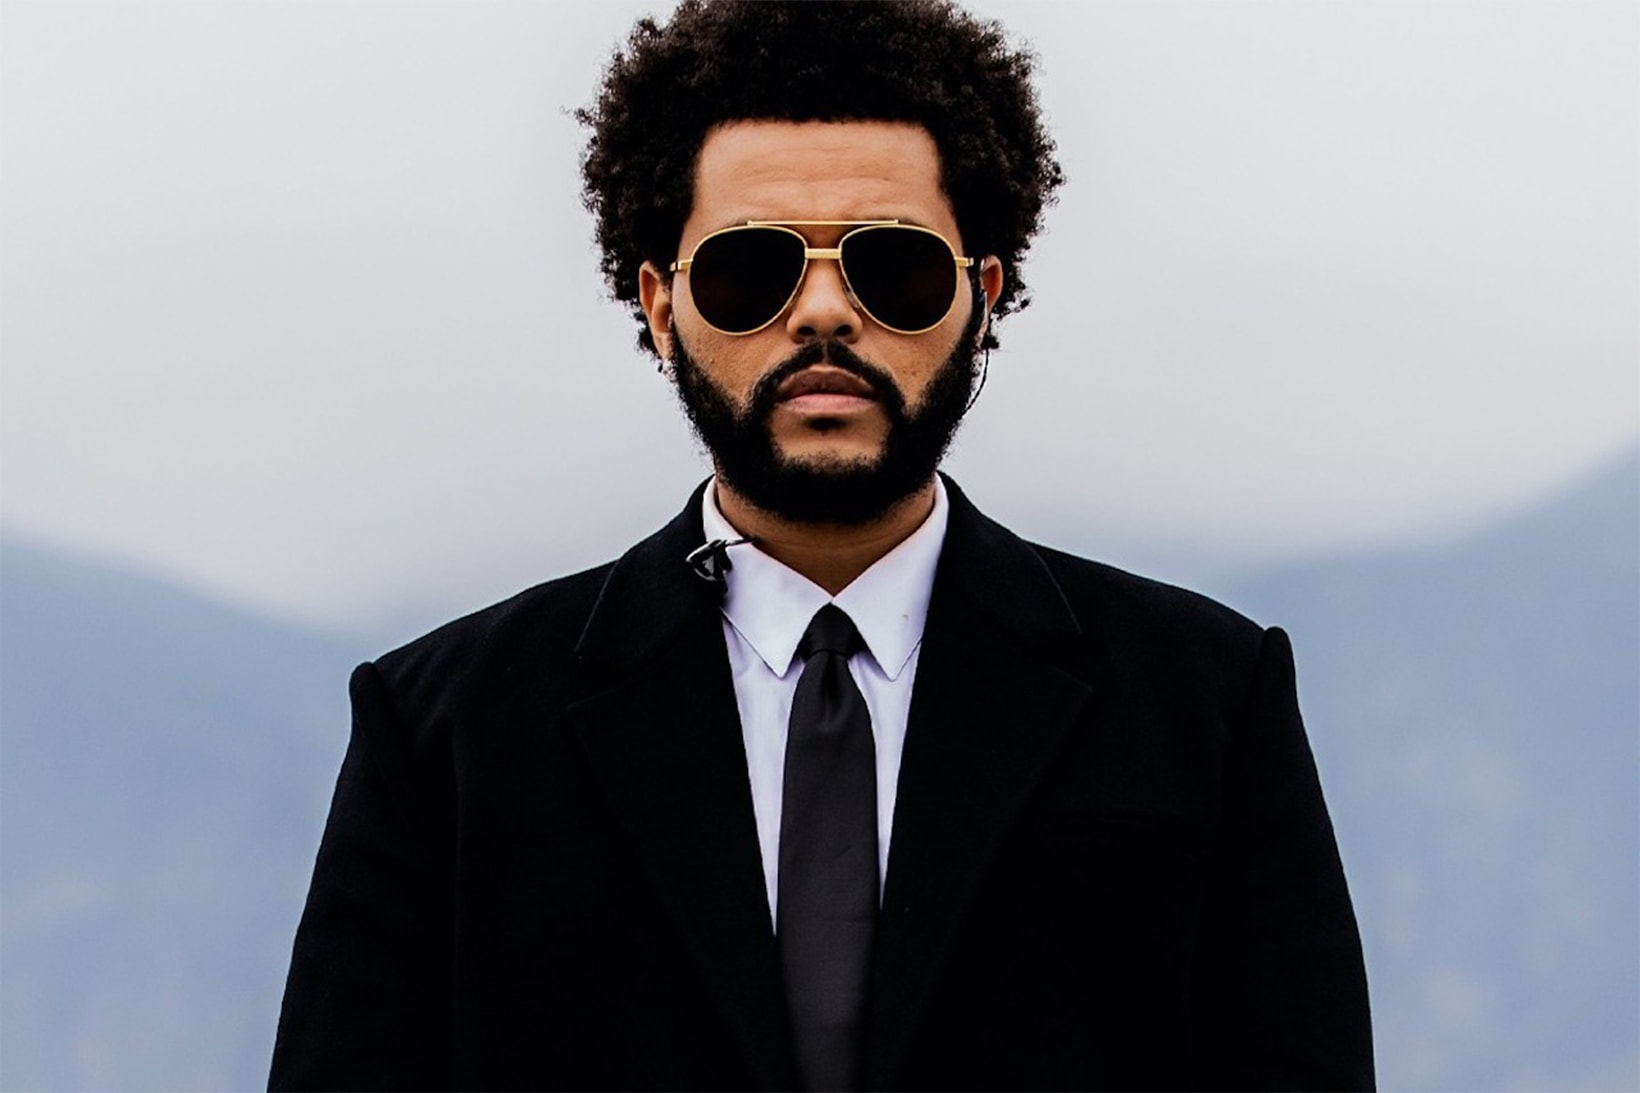 The Weeknd 'Dawn FM' Amazon Prime Live TV Special Announcement